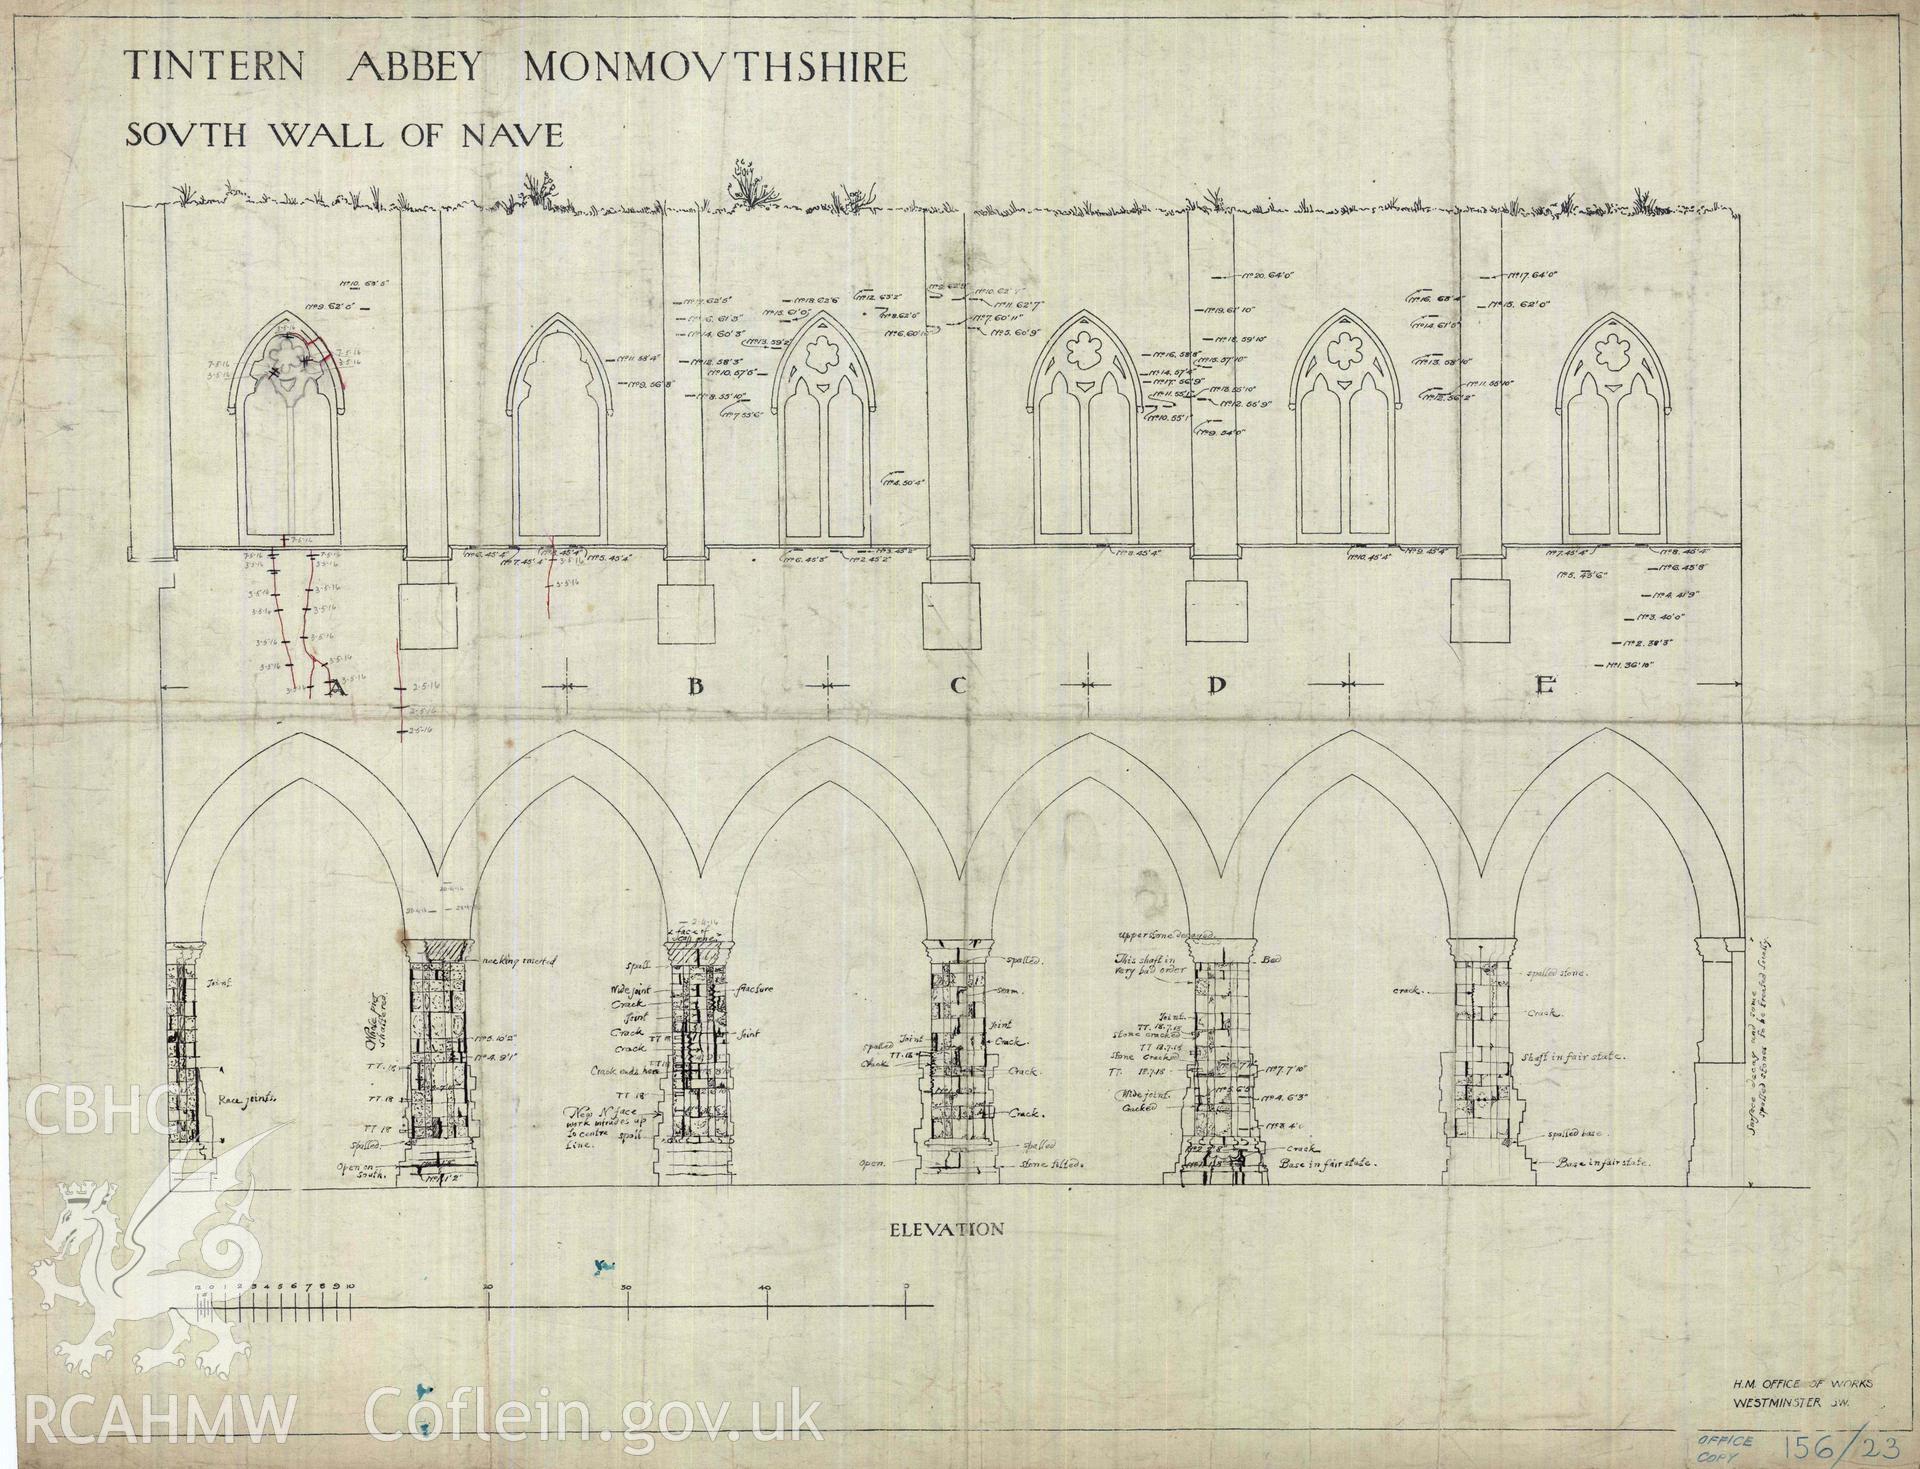 Cadw guardianship monument drawing of Tintern Abbey. Elevation S Wall of Nave + annotations. Cadw ref. No. 156/23. Scale 1:1:20.